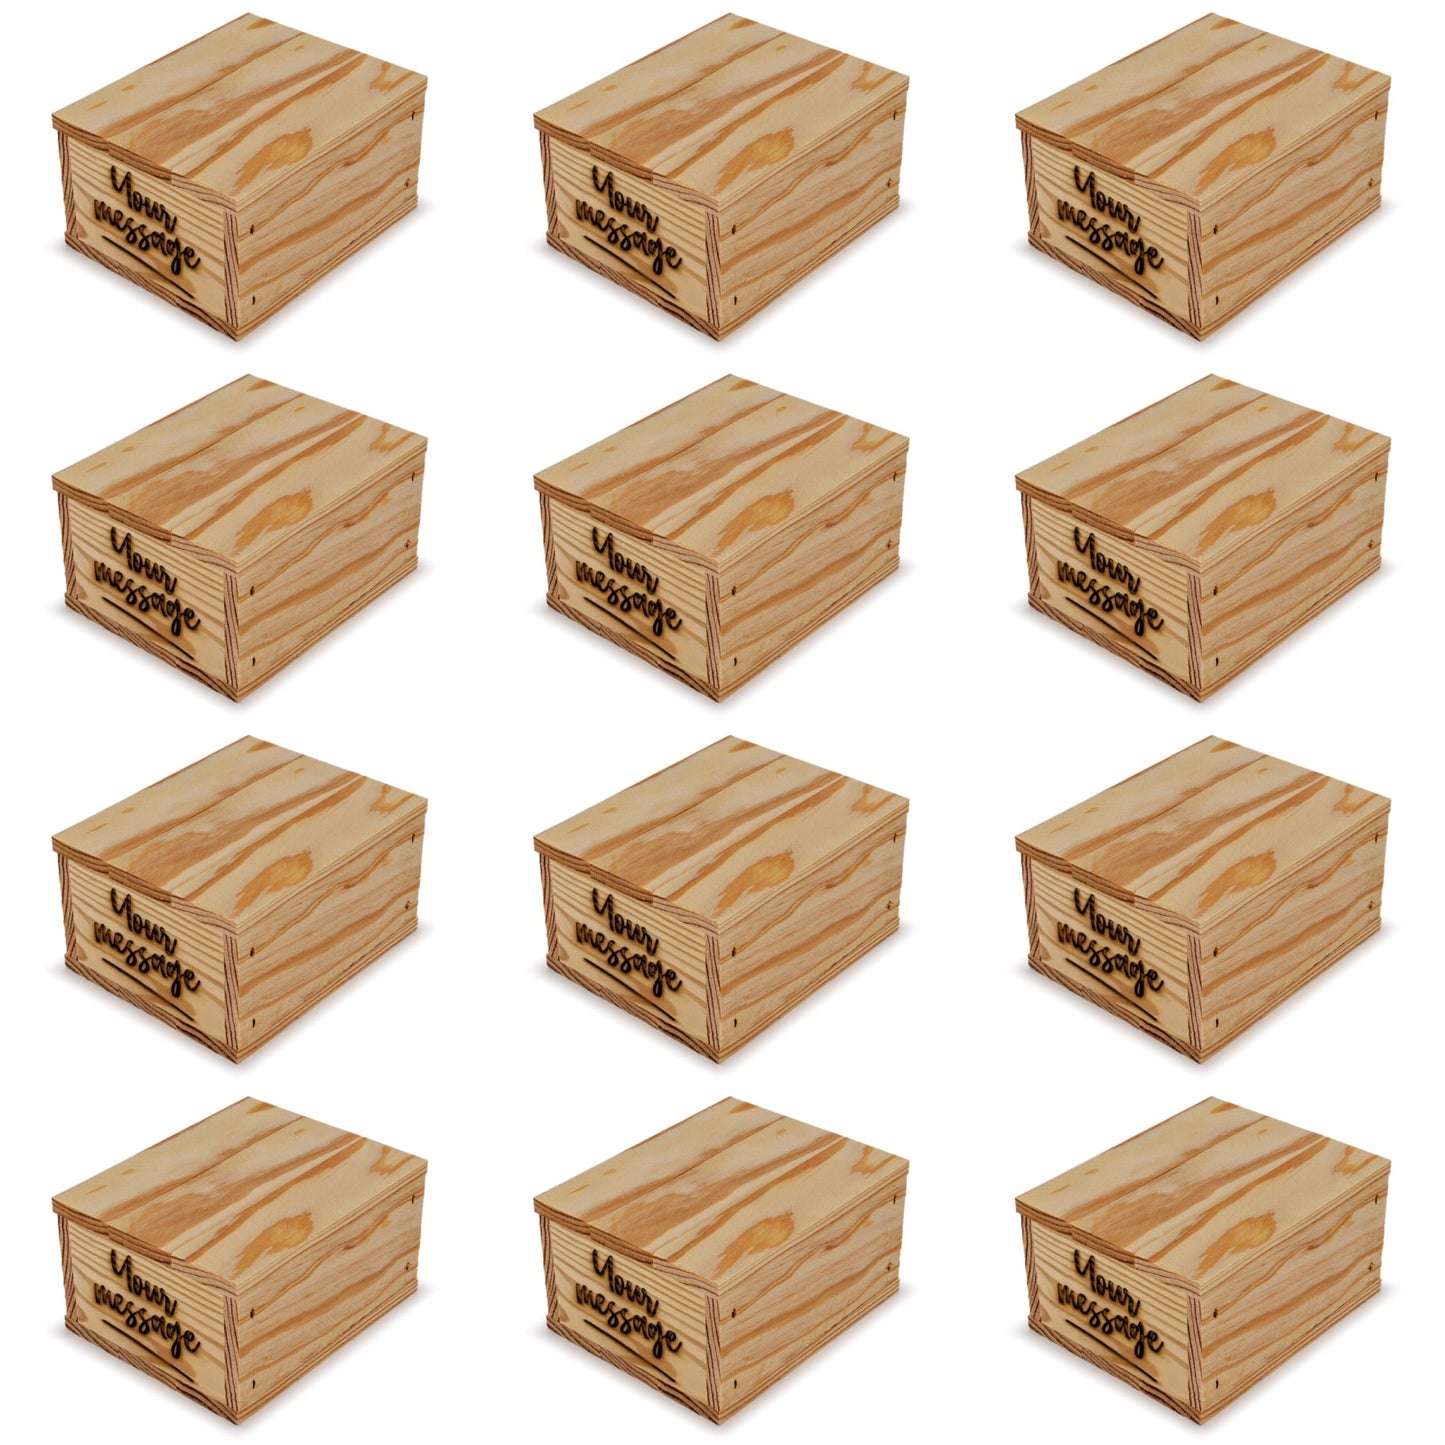 12 Small wooden crates with lid and custom message 5x4.5x2.75